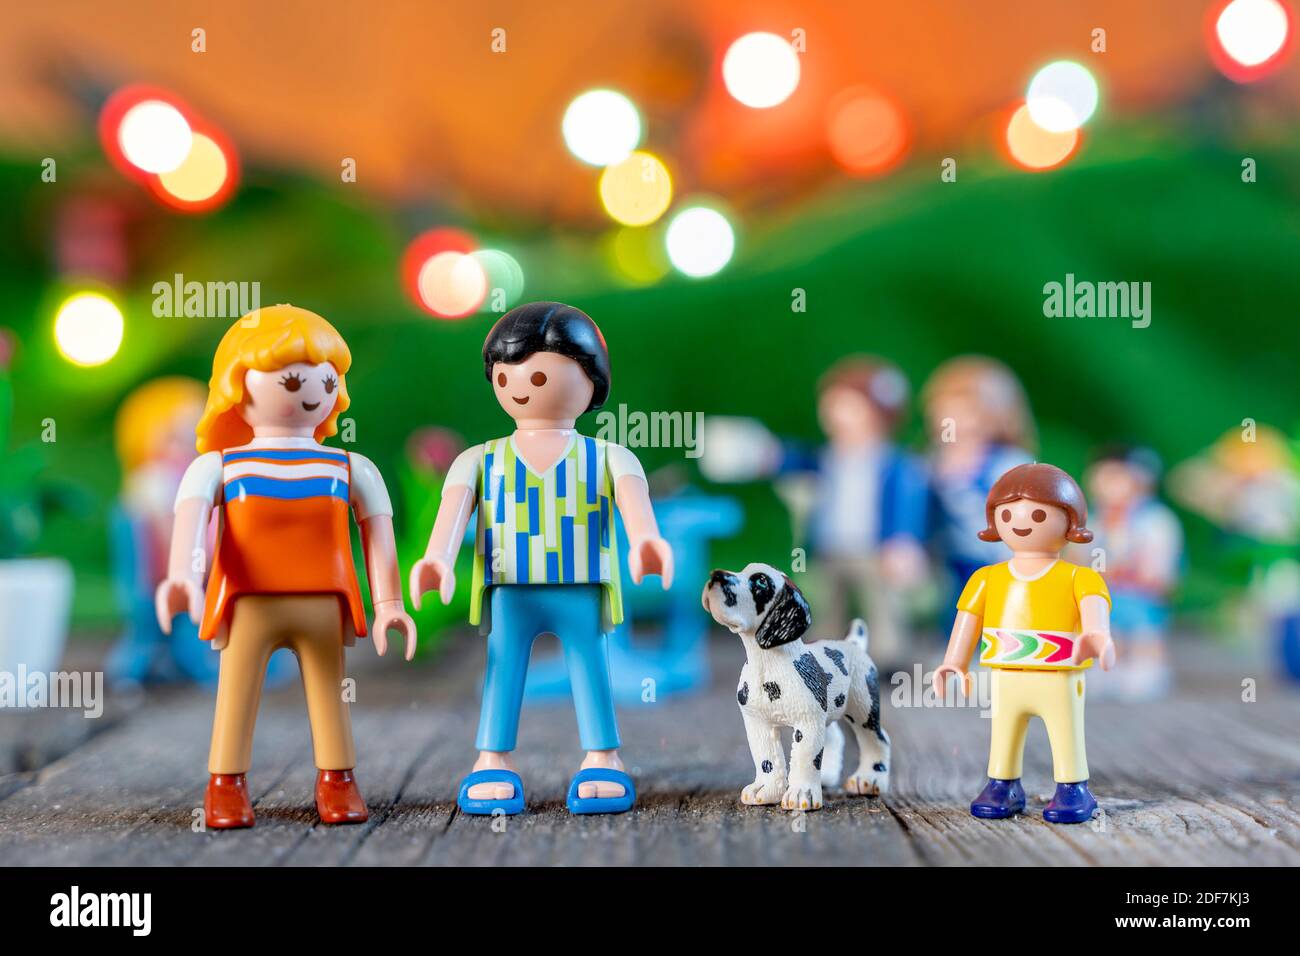 1,622 Playmobil Images, Stock Photos, 3D objects, & Vectors